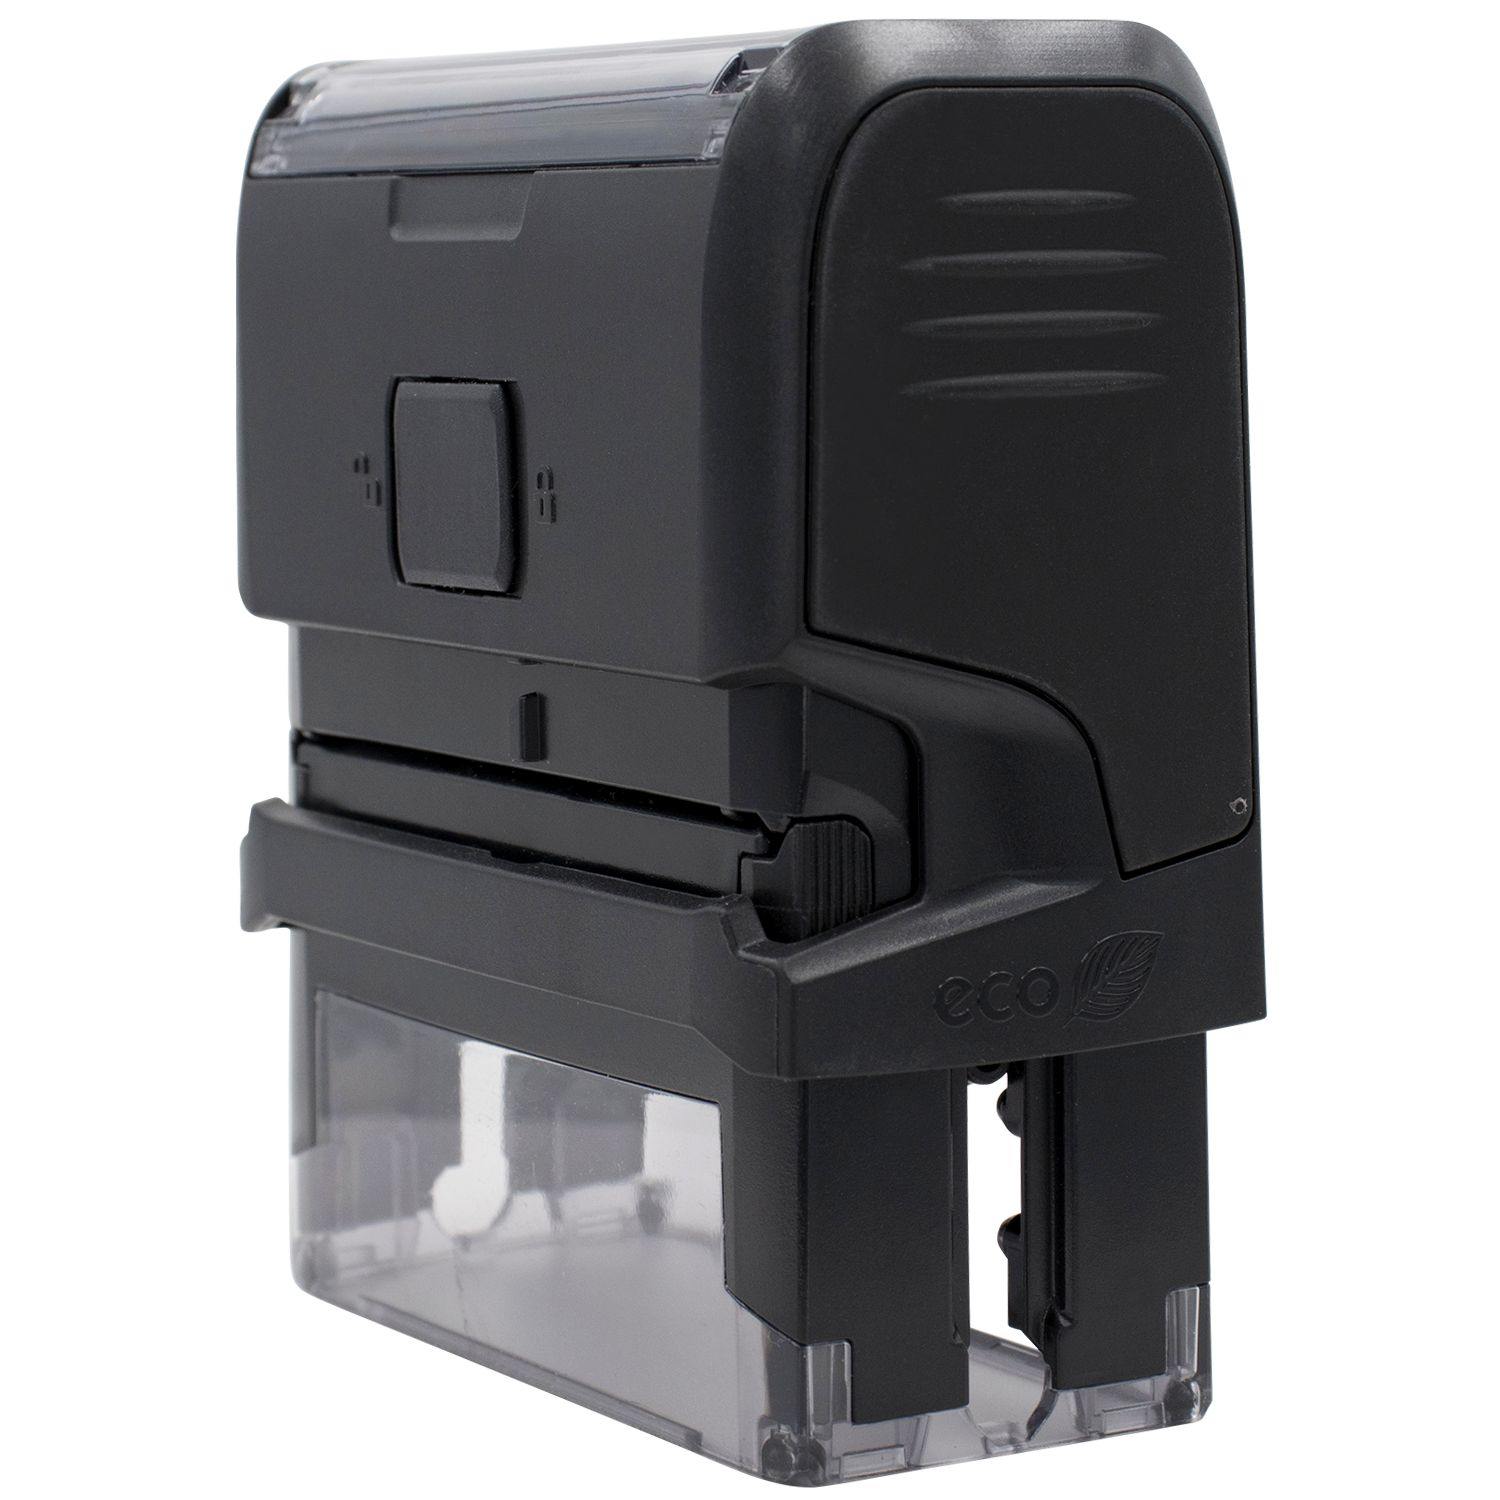 Self Inking Workers Comp Stamp - Engineer Seal Stamps - Brand_Trodat, Impression Size_Small, Stamp Type_Self-Inking Stamp, Type of Use_Finance